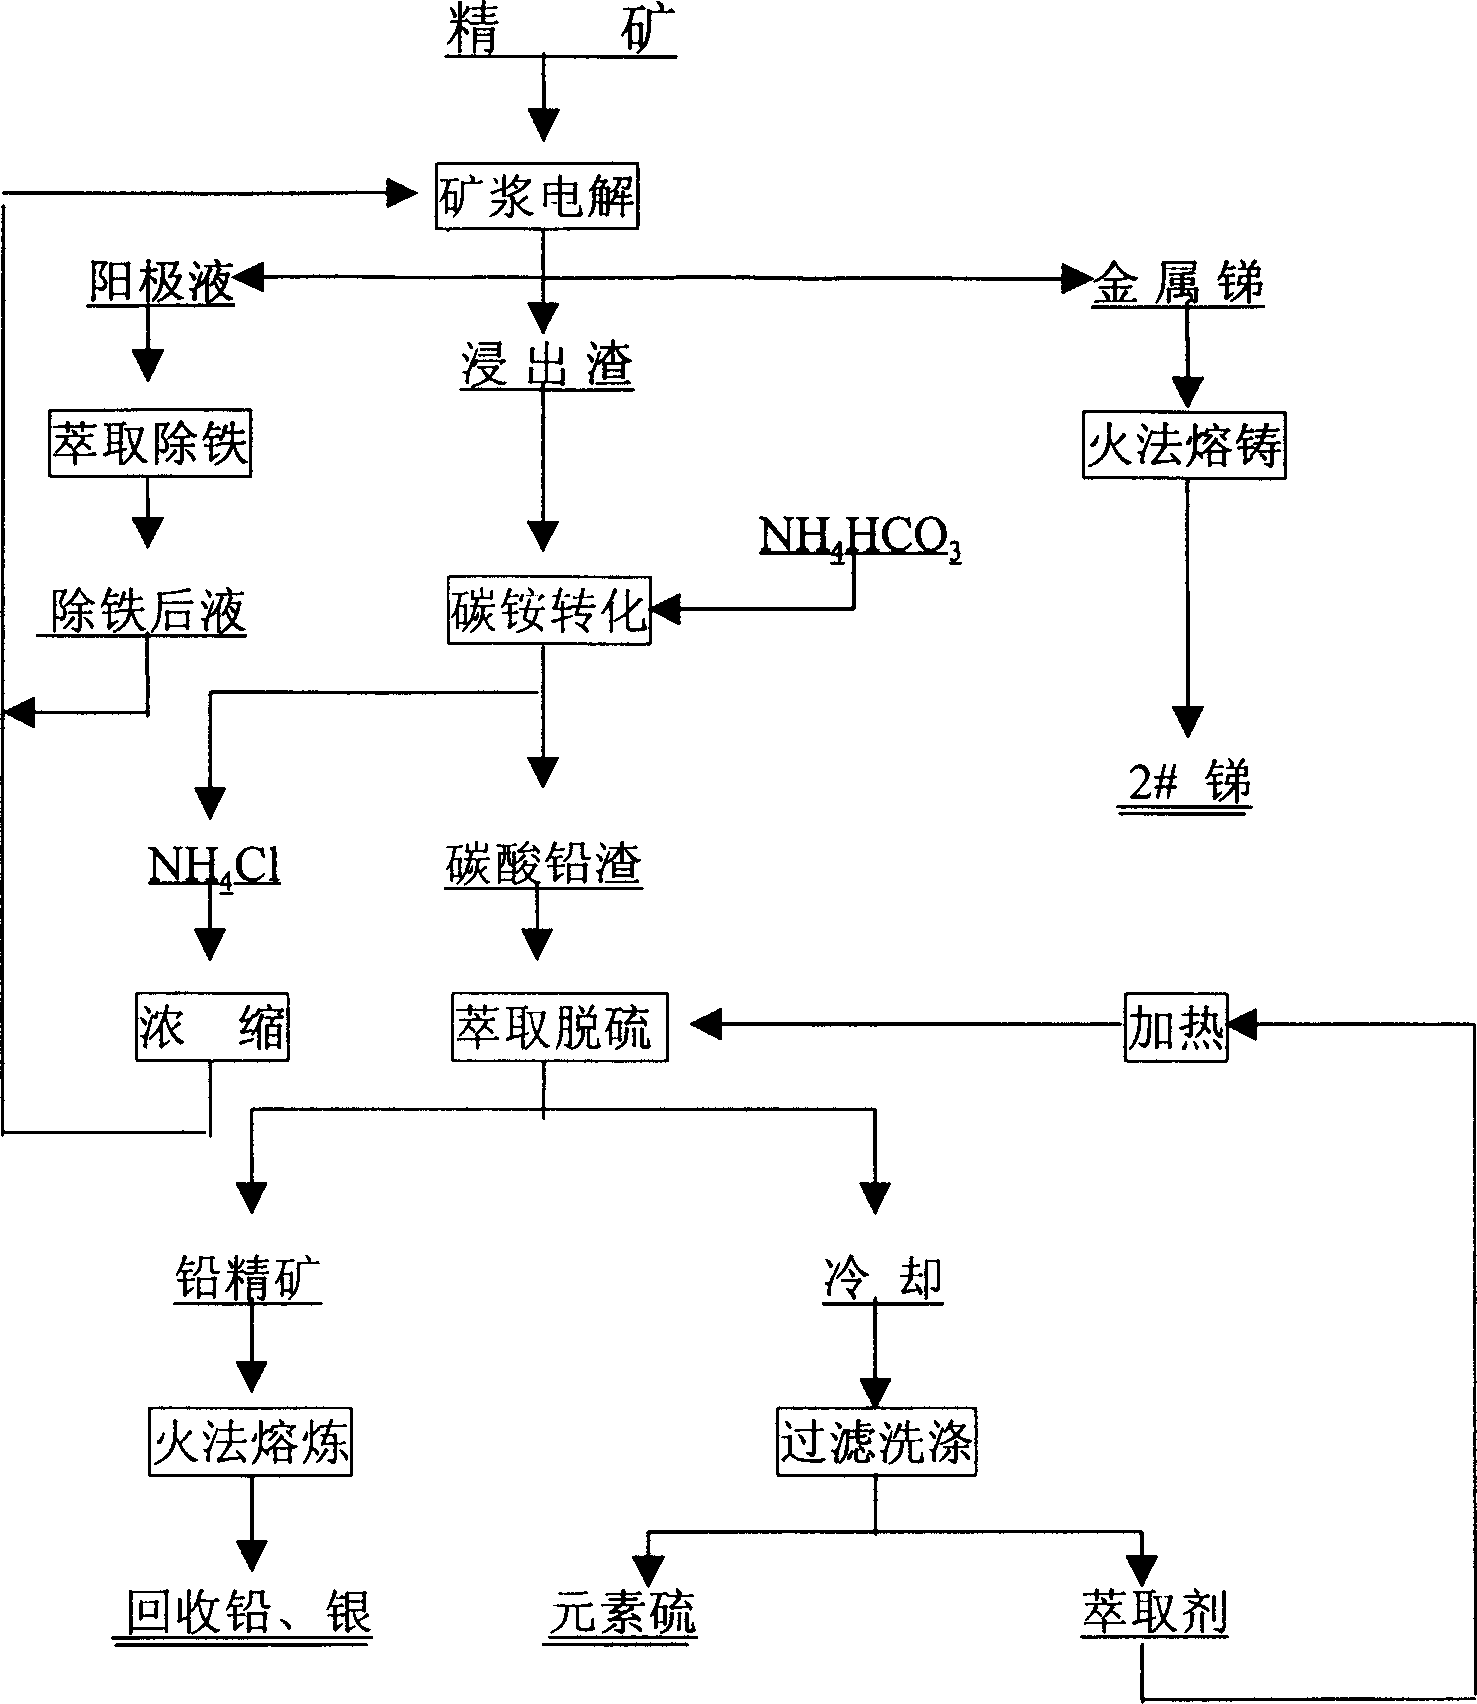 Process for preparing antimony by electrolyzing slurry of sulfide ore containing antimony